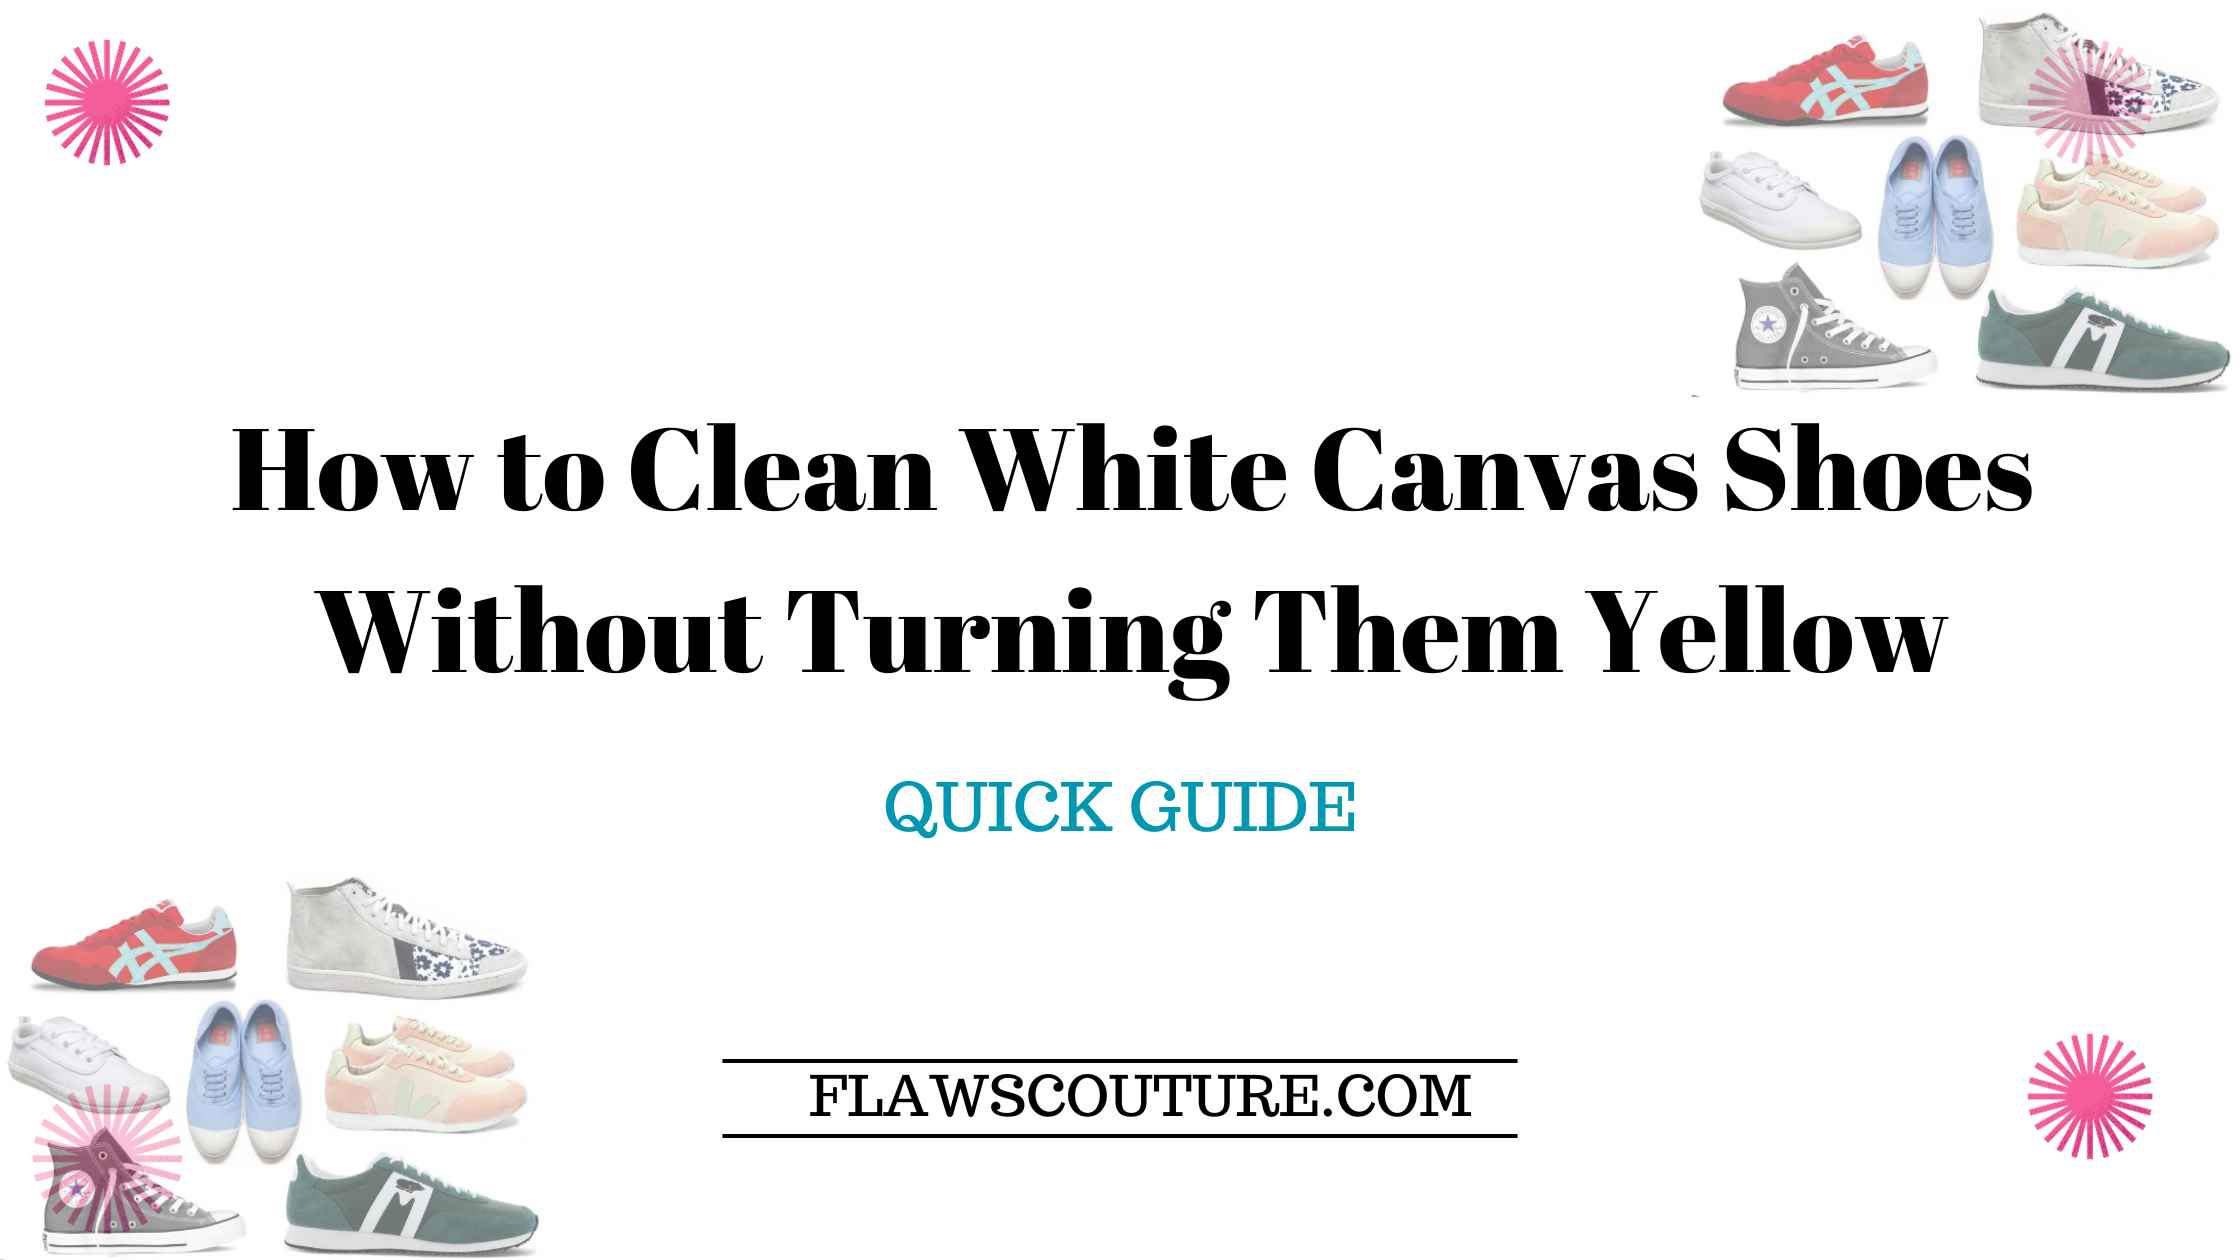 How to Clean White Canvas Shoes Without Turning Them Yellow